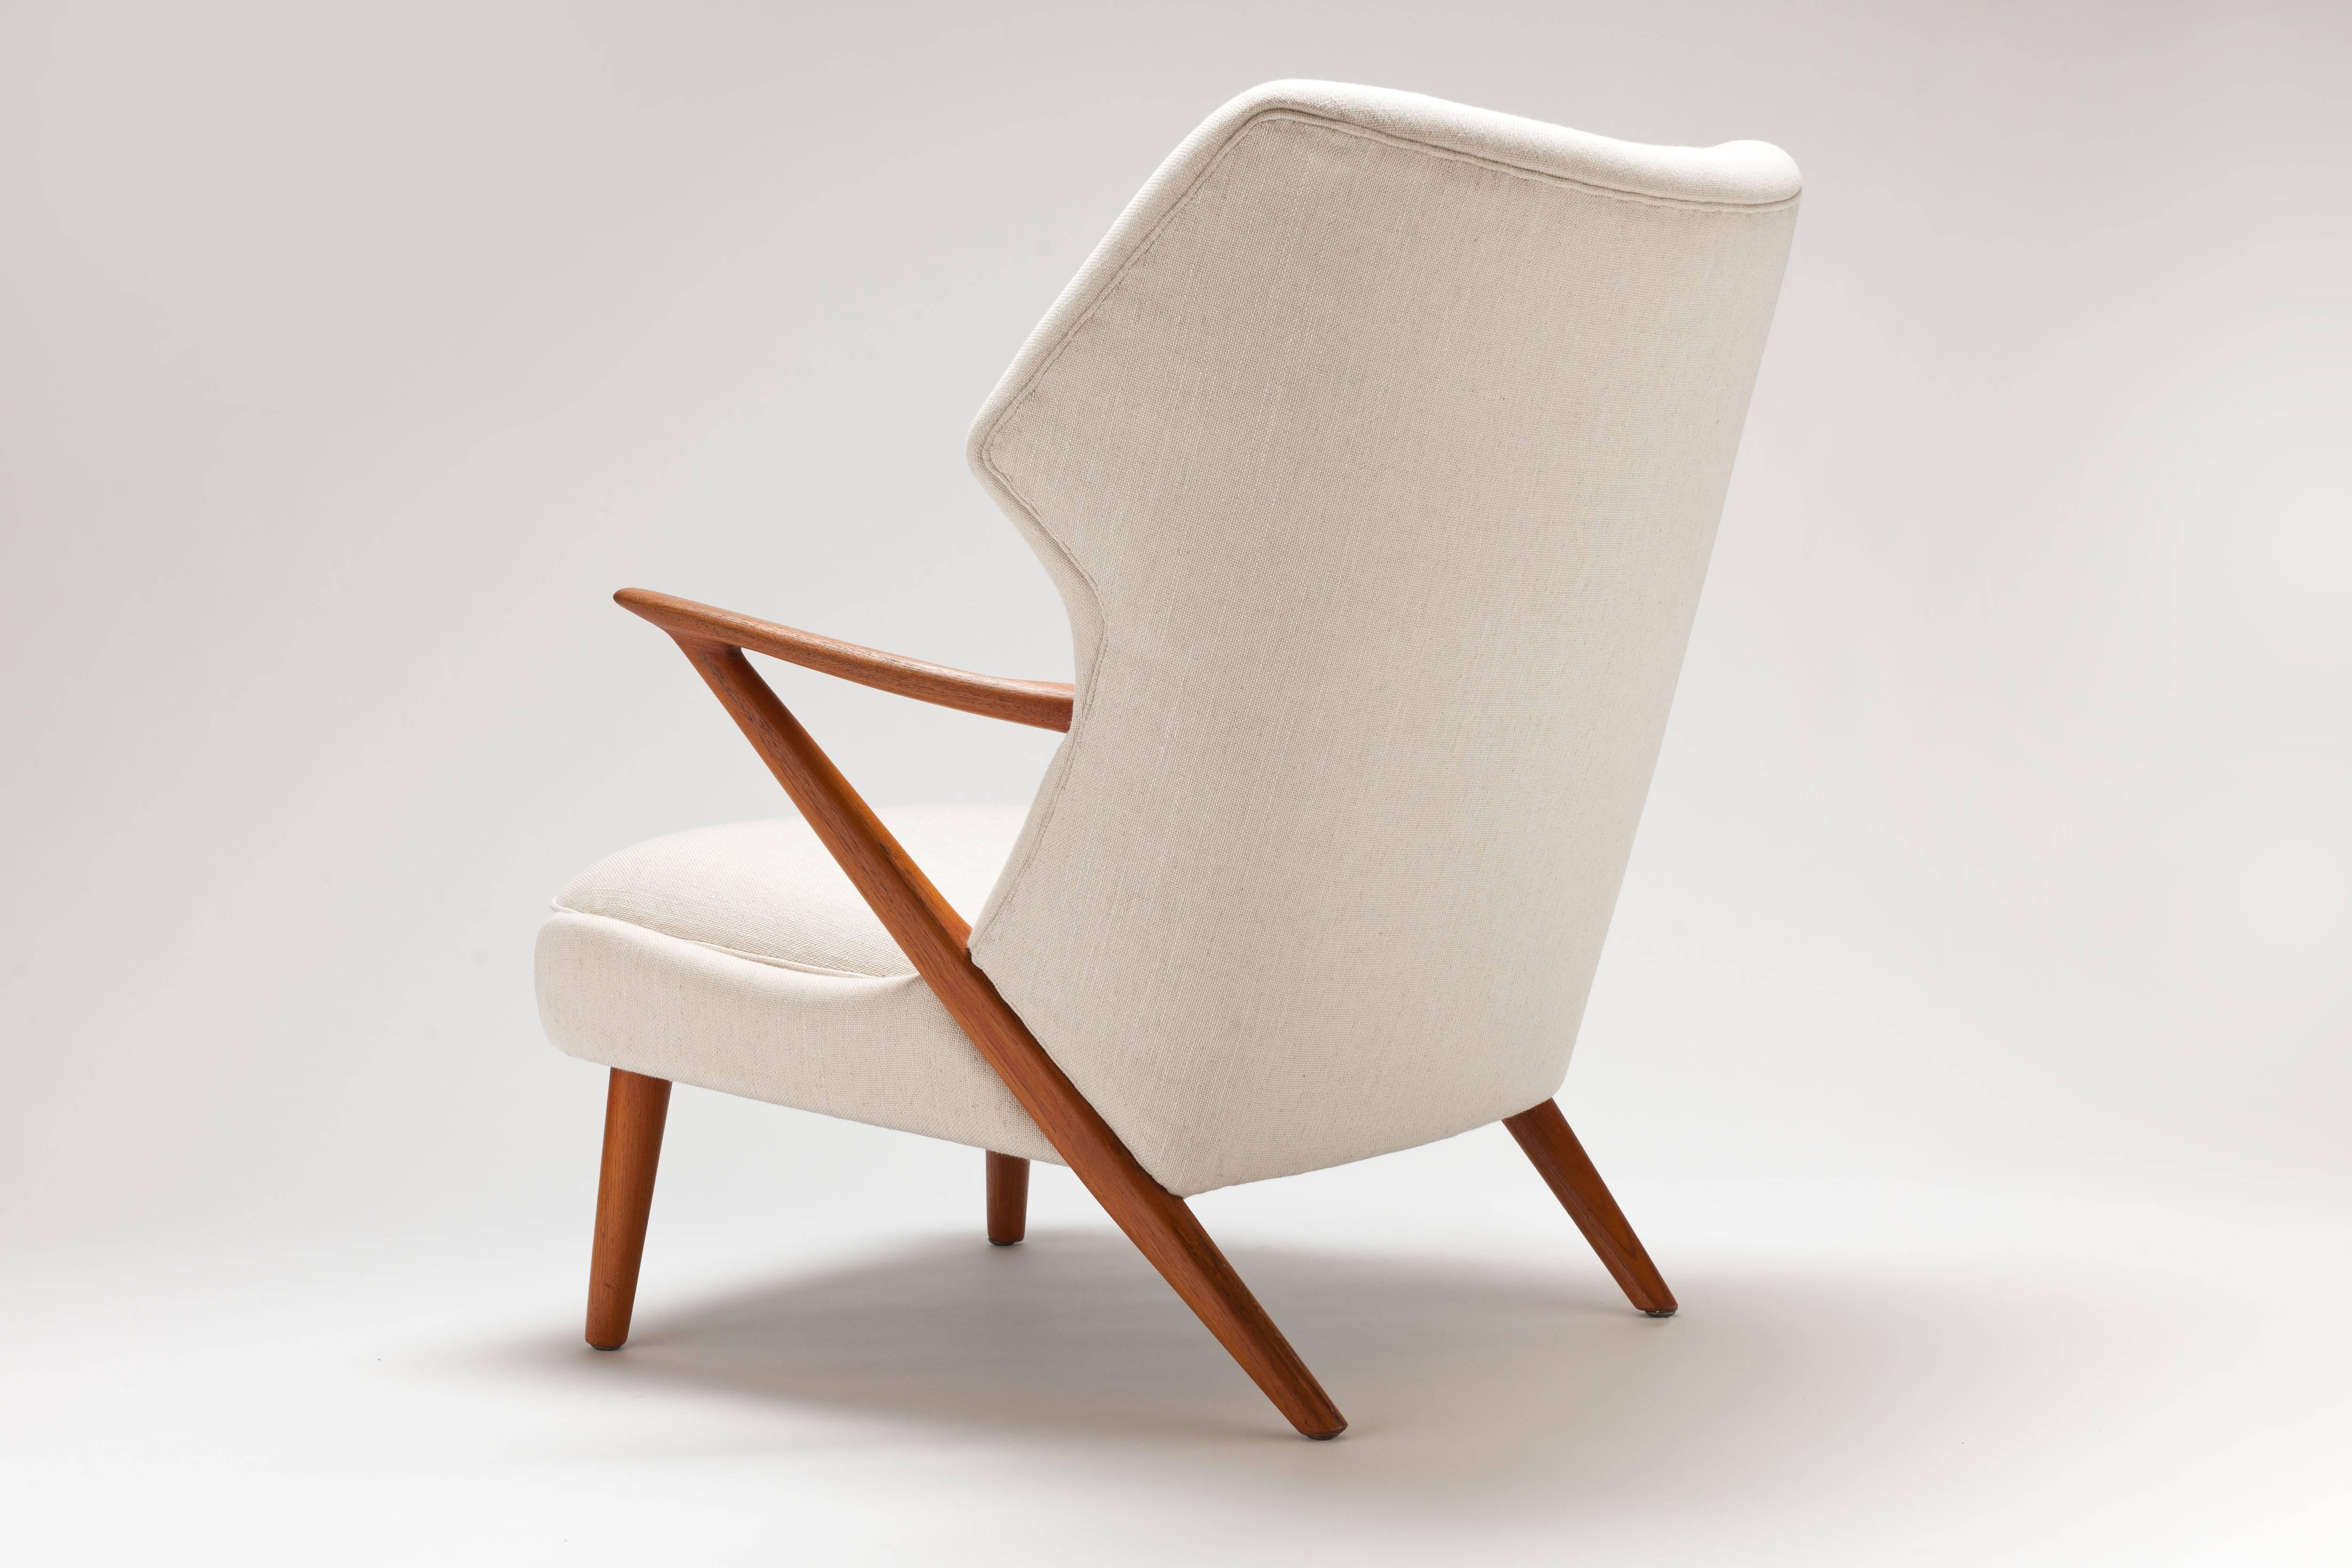 Beautiful lounge chair by Danish designer Kurt Olsen, designed in 1955 and crafted by Slagelse Mobelvaerk Denmark.
This extremely comfortable tall lounge chair with a solid teak wood frame dates from the late 1950s and is fully restored with